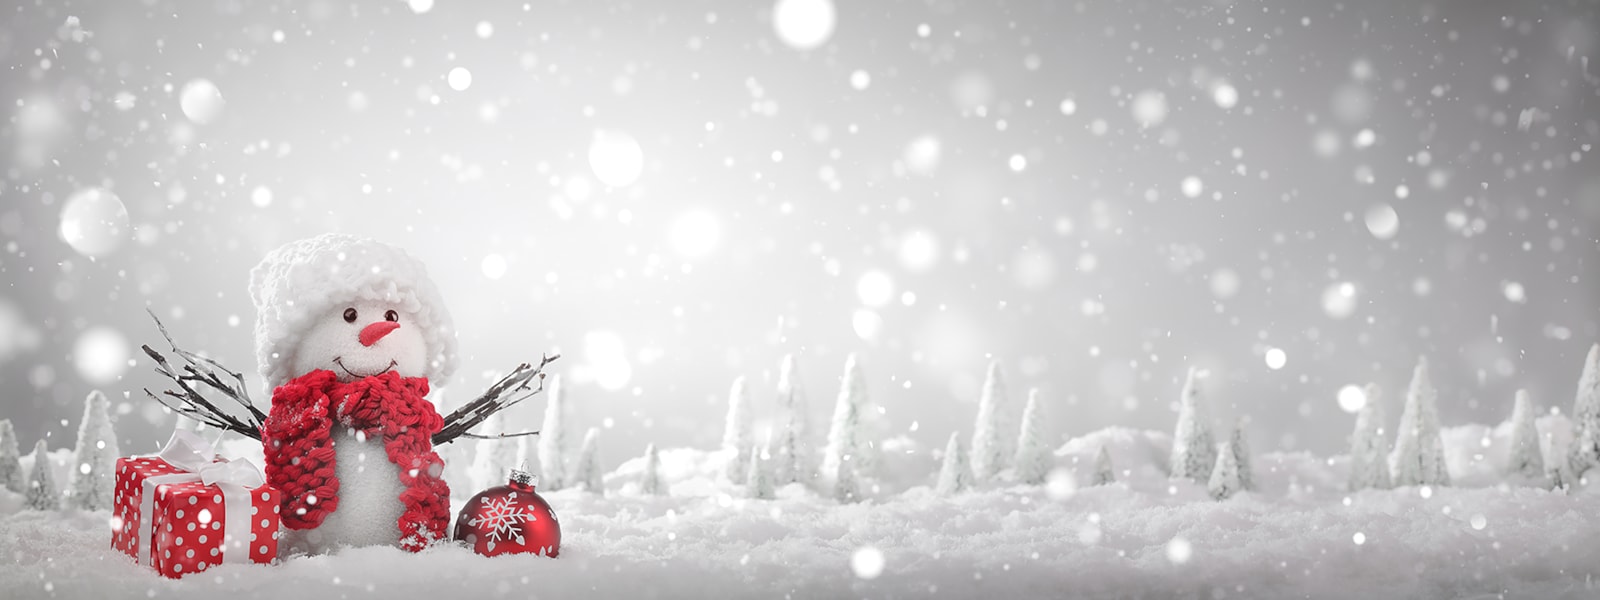 a snowman with red scarf on a snowy backdrop with a red present and red ornament next to it.